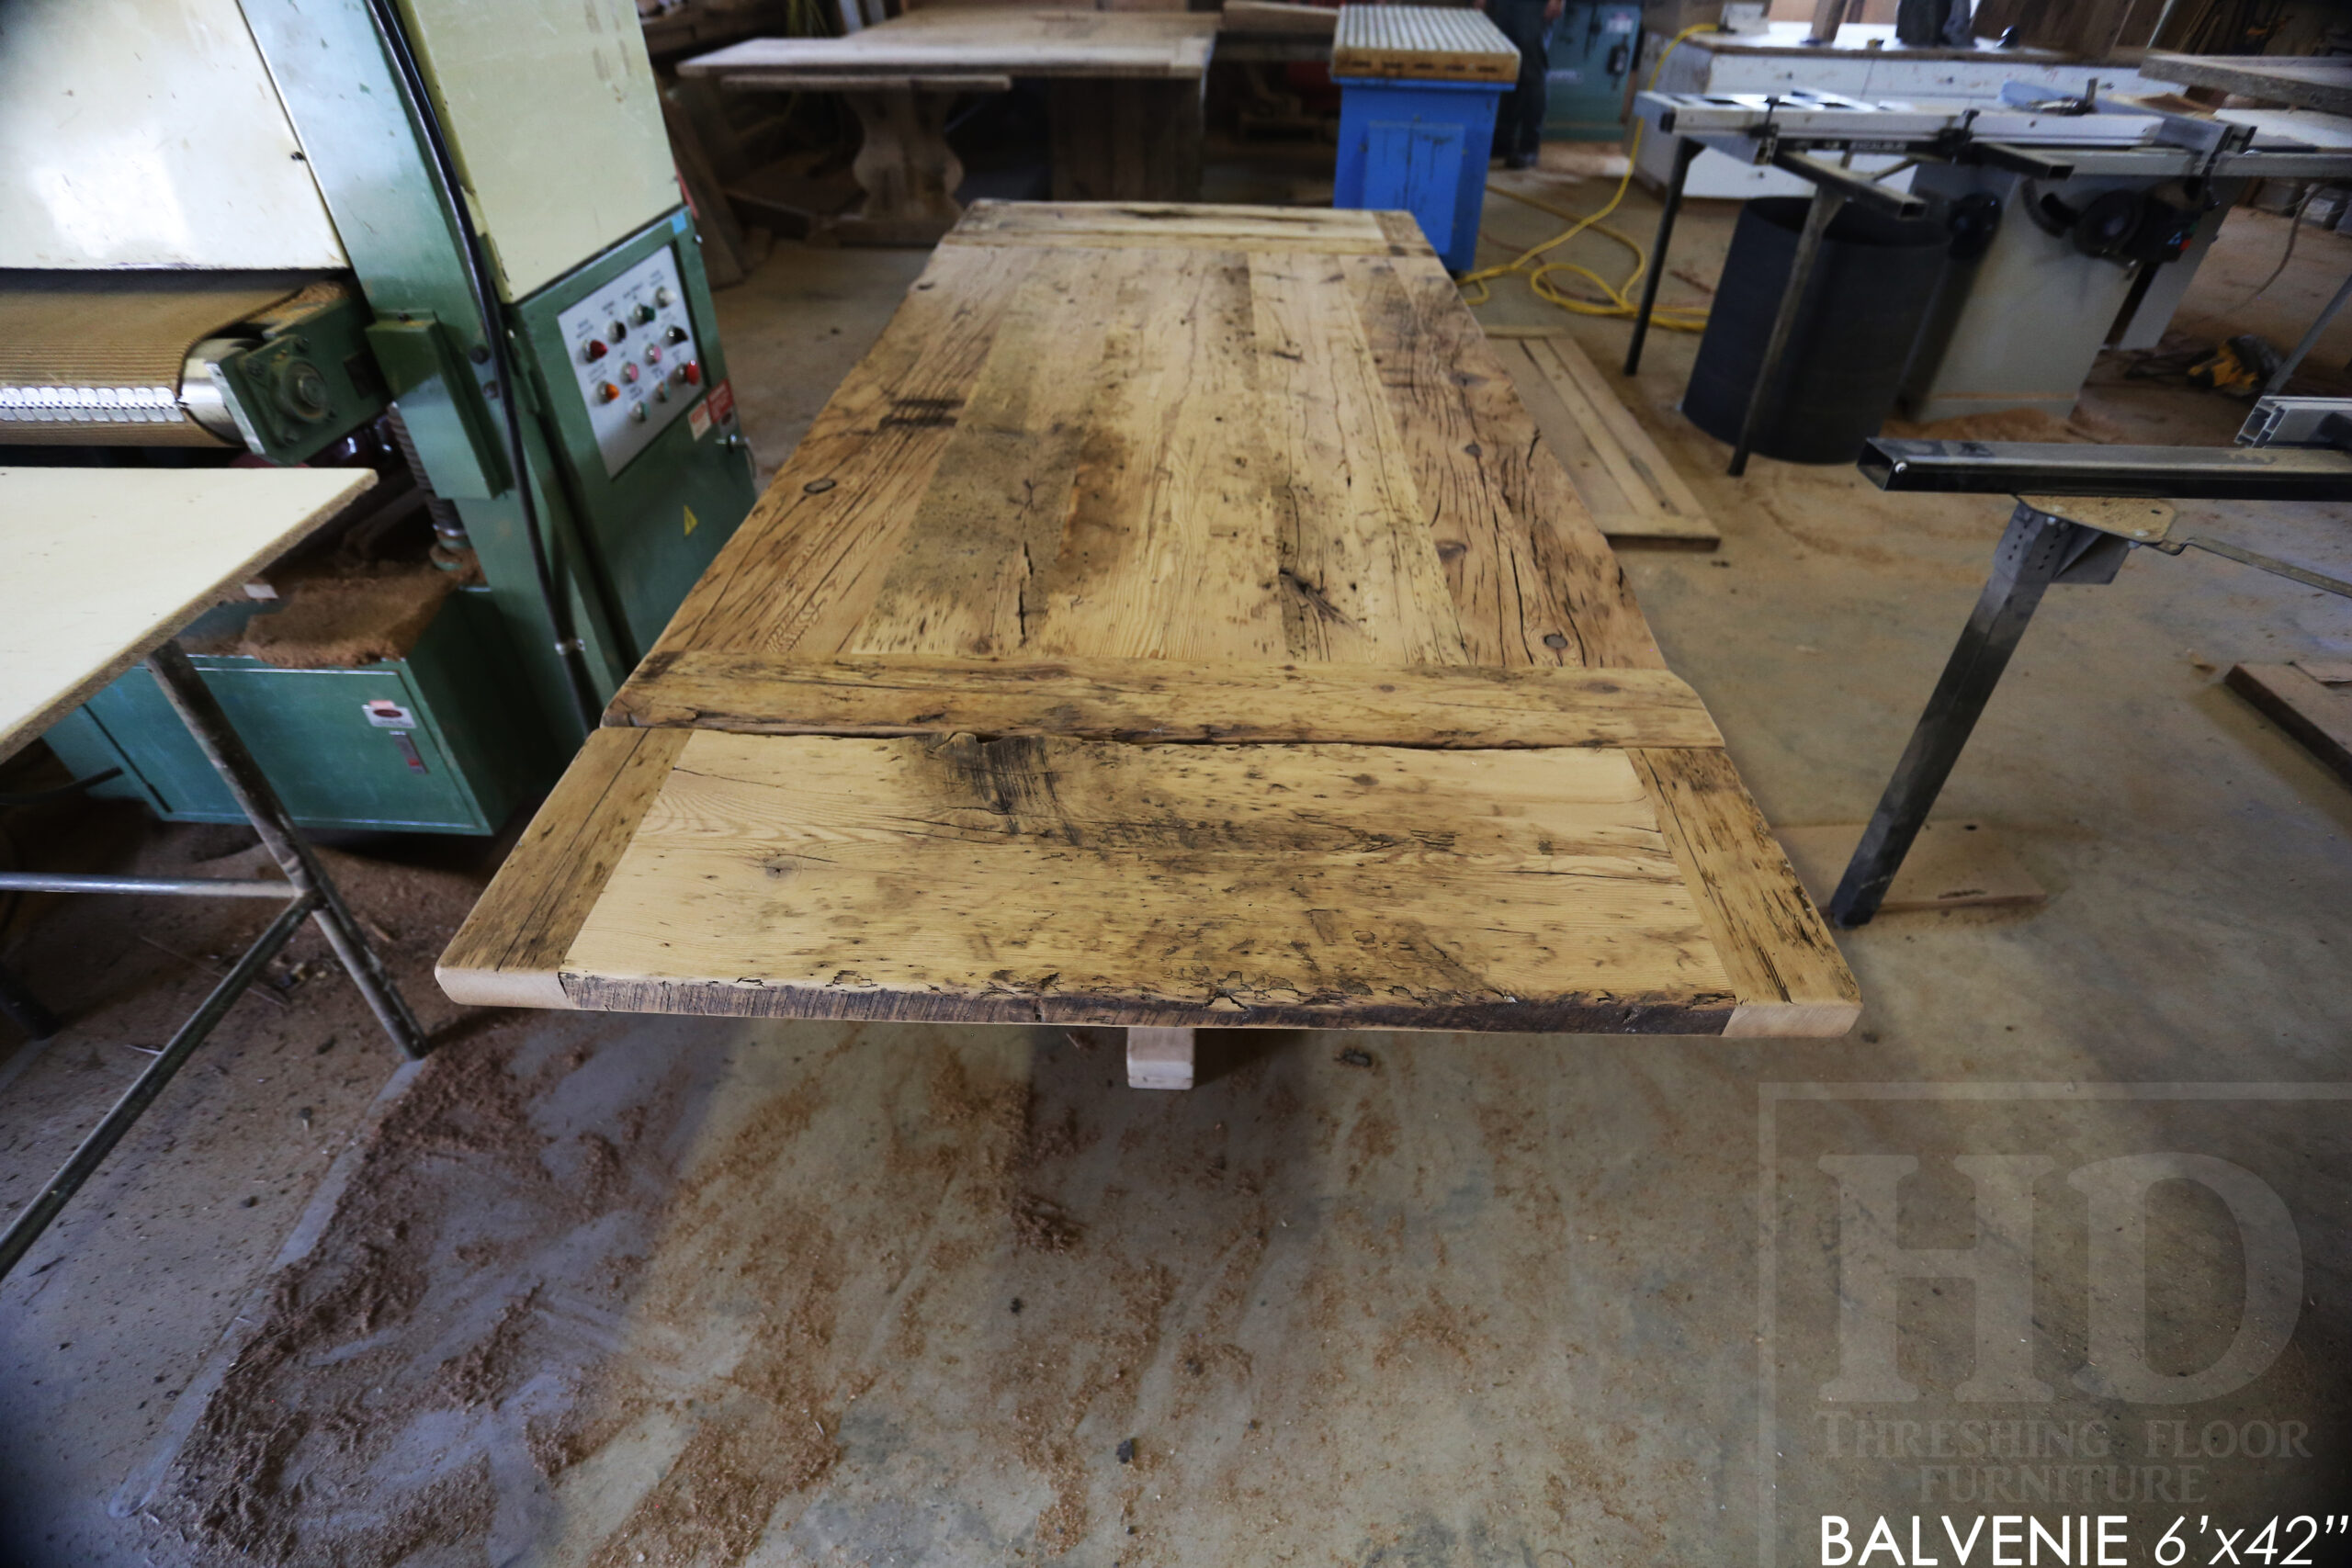 6' Reclaimed Wood Table for a Caledonia Home - 42" wide - Hand-Hewn Beam Pedestals Base - Hemlock Threshing Floor Construction - Original edges & distressing maintained - Premium epoxy + satin polyurethane finish - Two 12" Leaf Extensions - 18" Round Lazy Susan - 6' reclaimed wood bench / www.table.ca